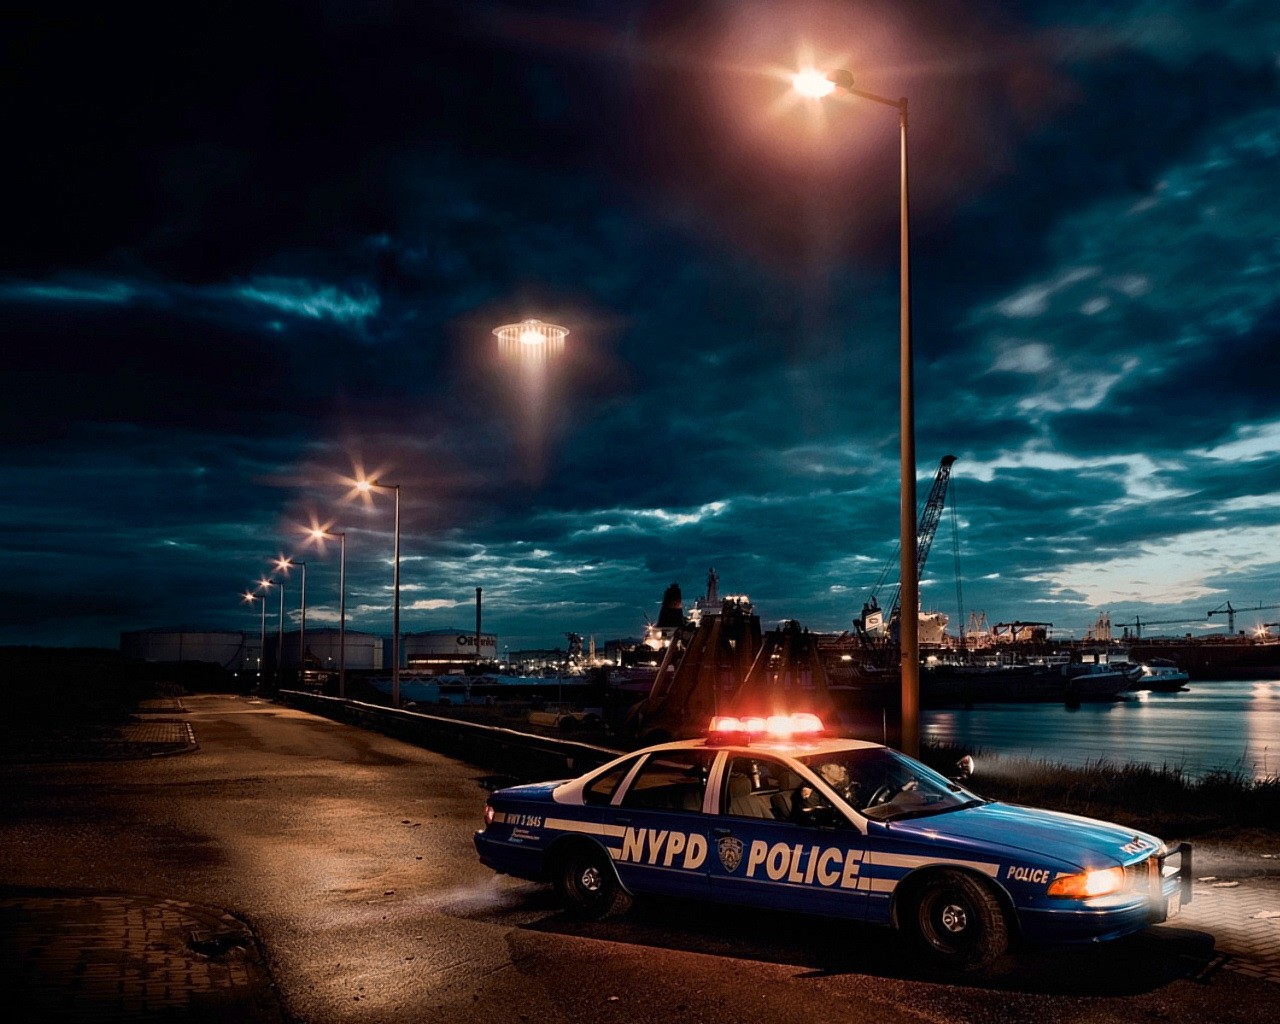 Wallpaper police cars port ufo lights night wallpapers situations